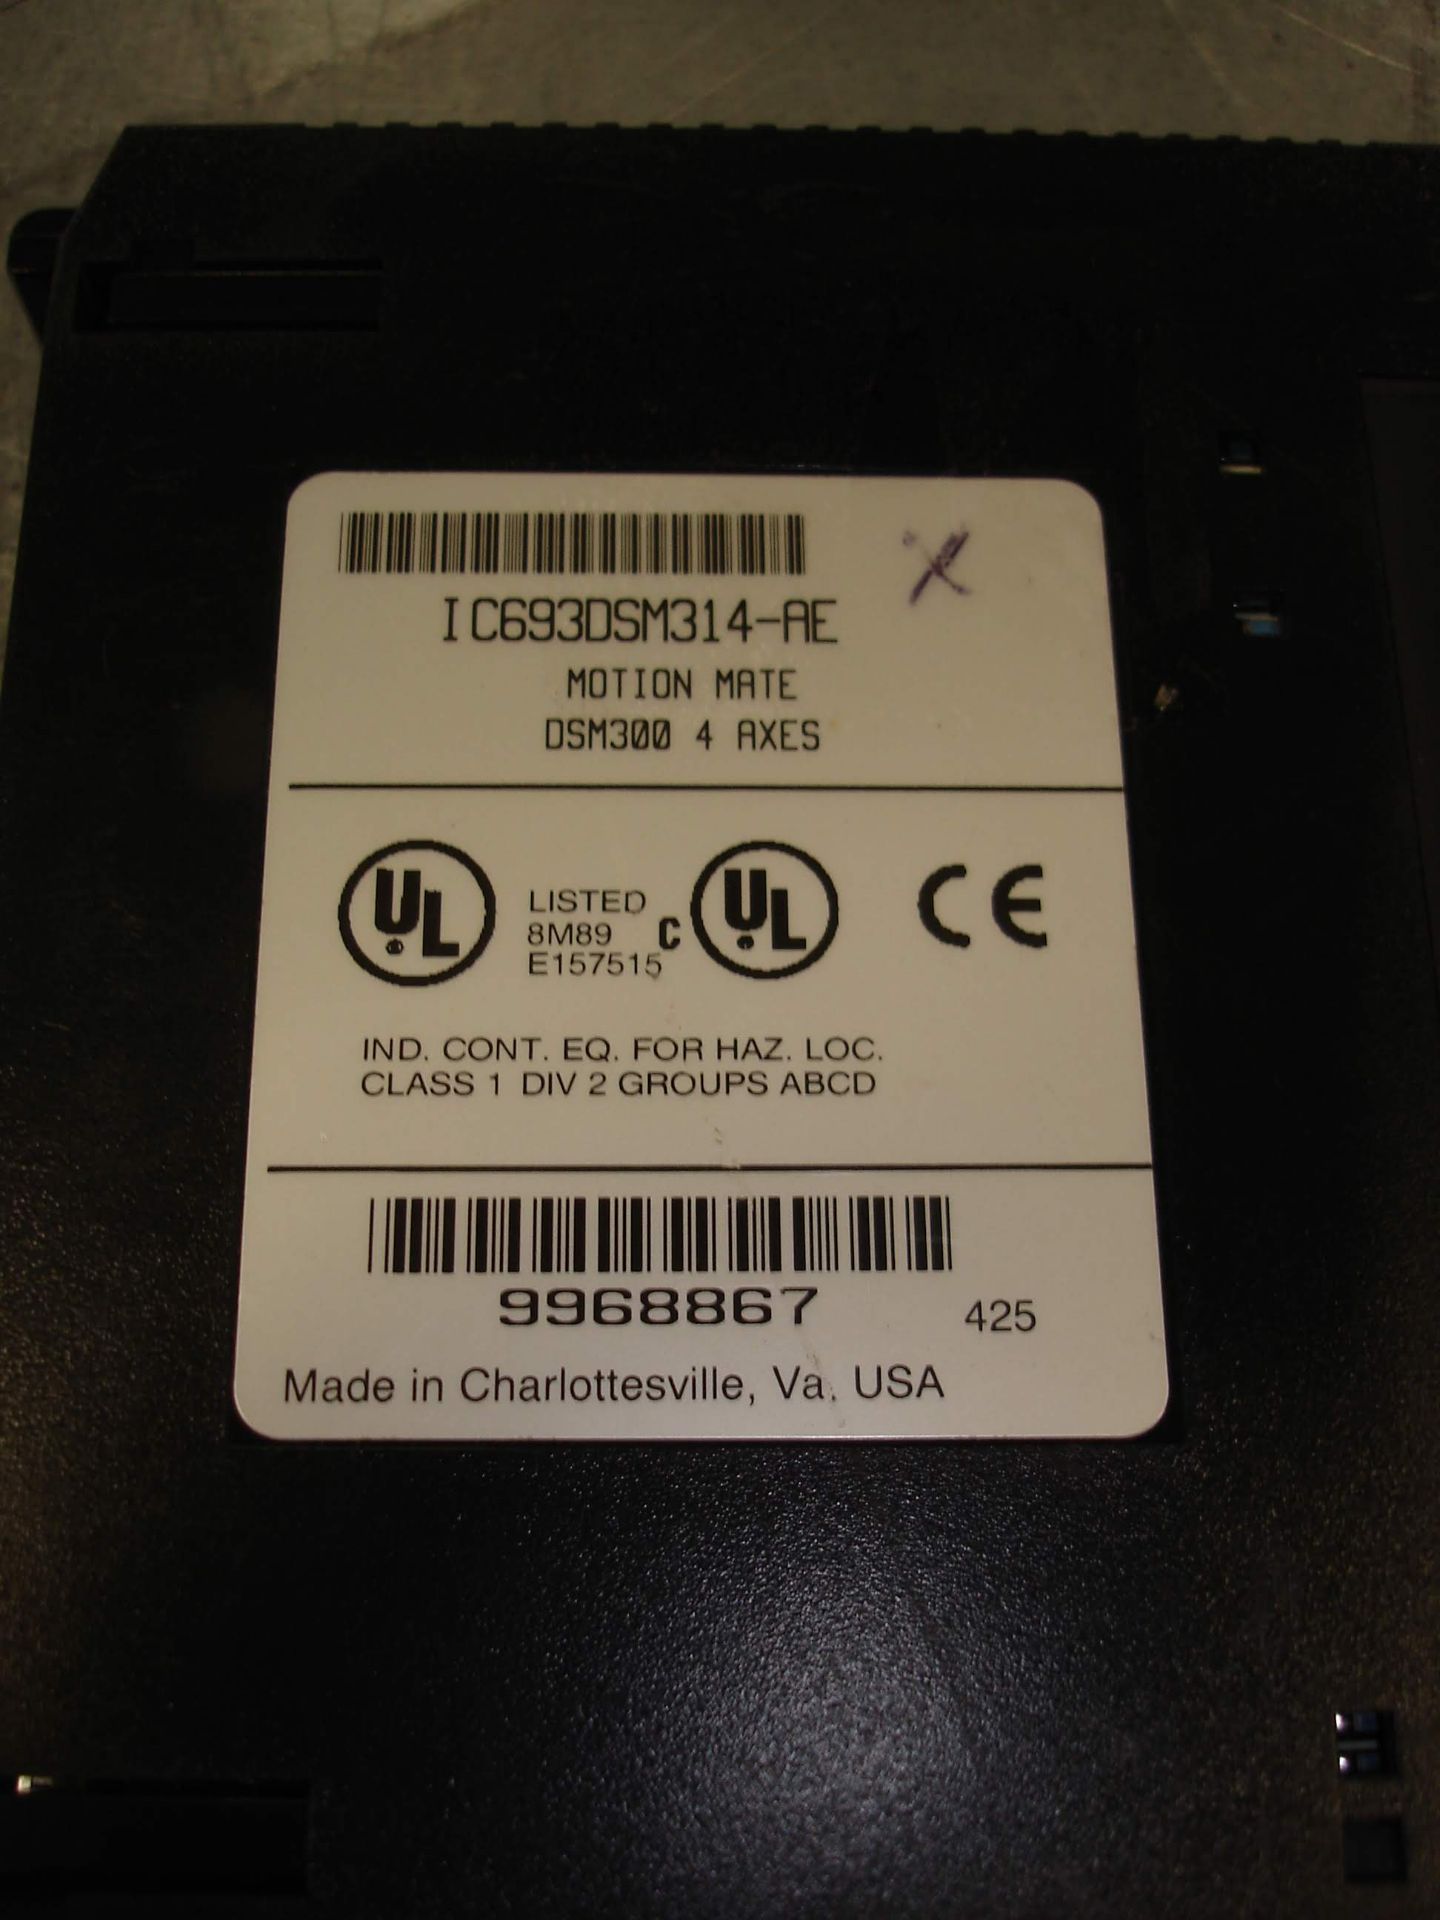 (1) IC693DSM314-AE GE FANUC MOTION MATE 4 AXES CONTROL MODULE USED. Pickup your lot(s) for free! - Image 4 of 4